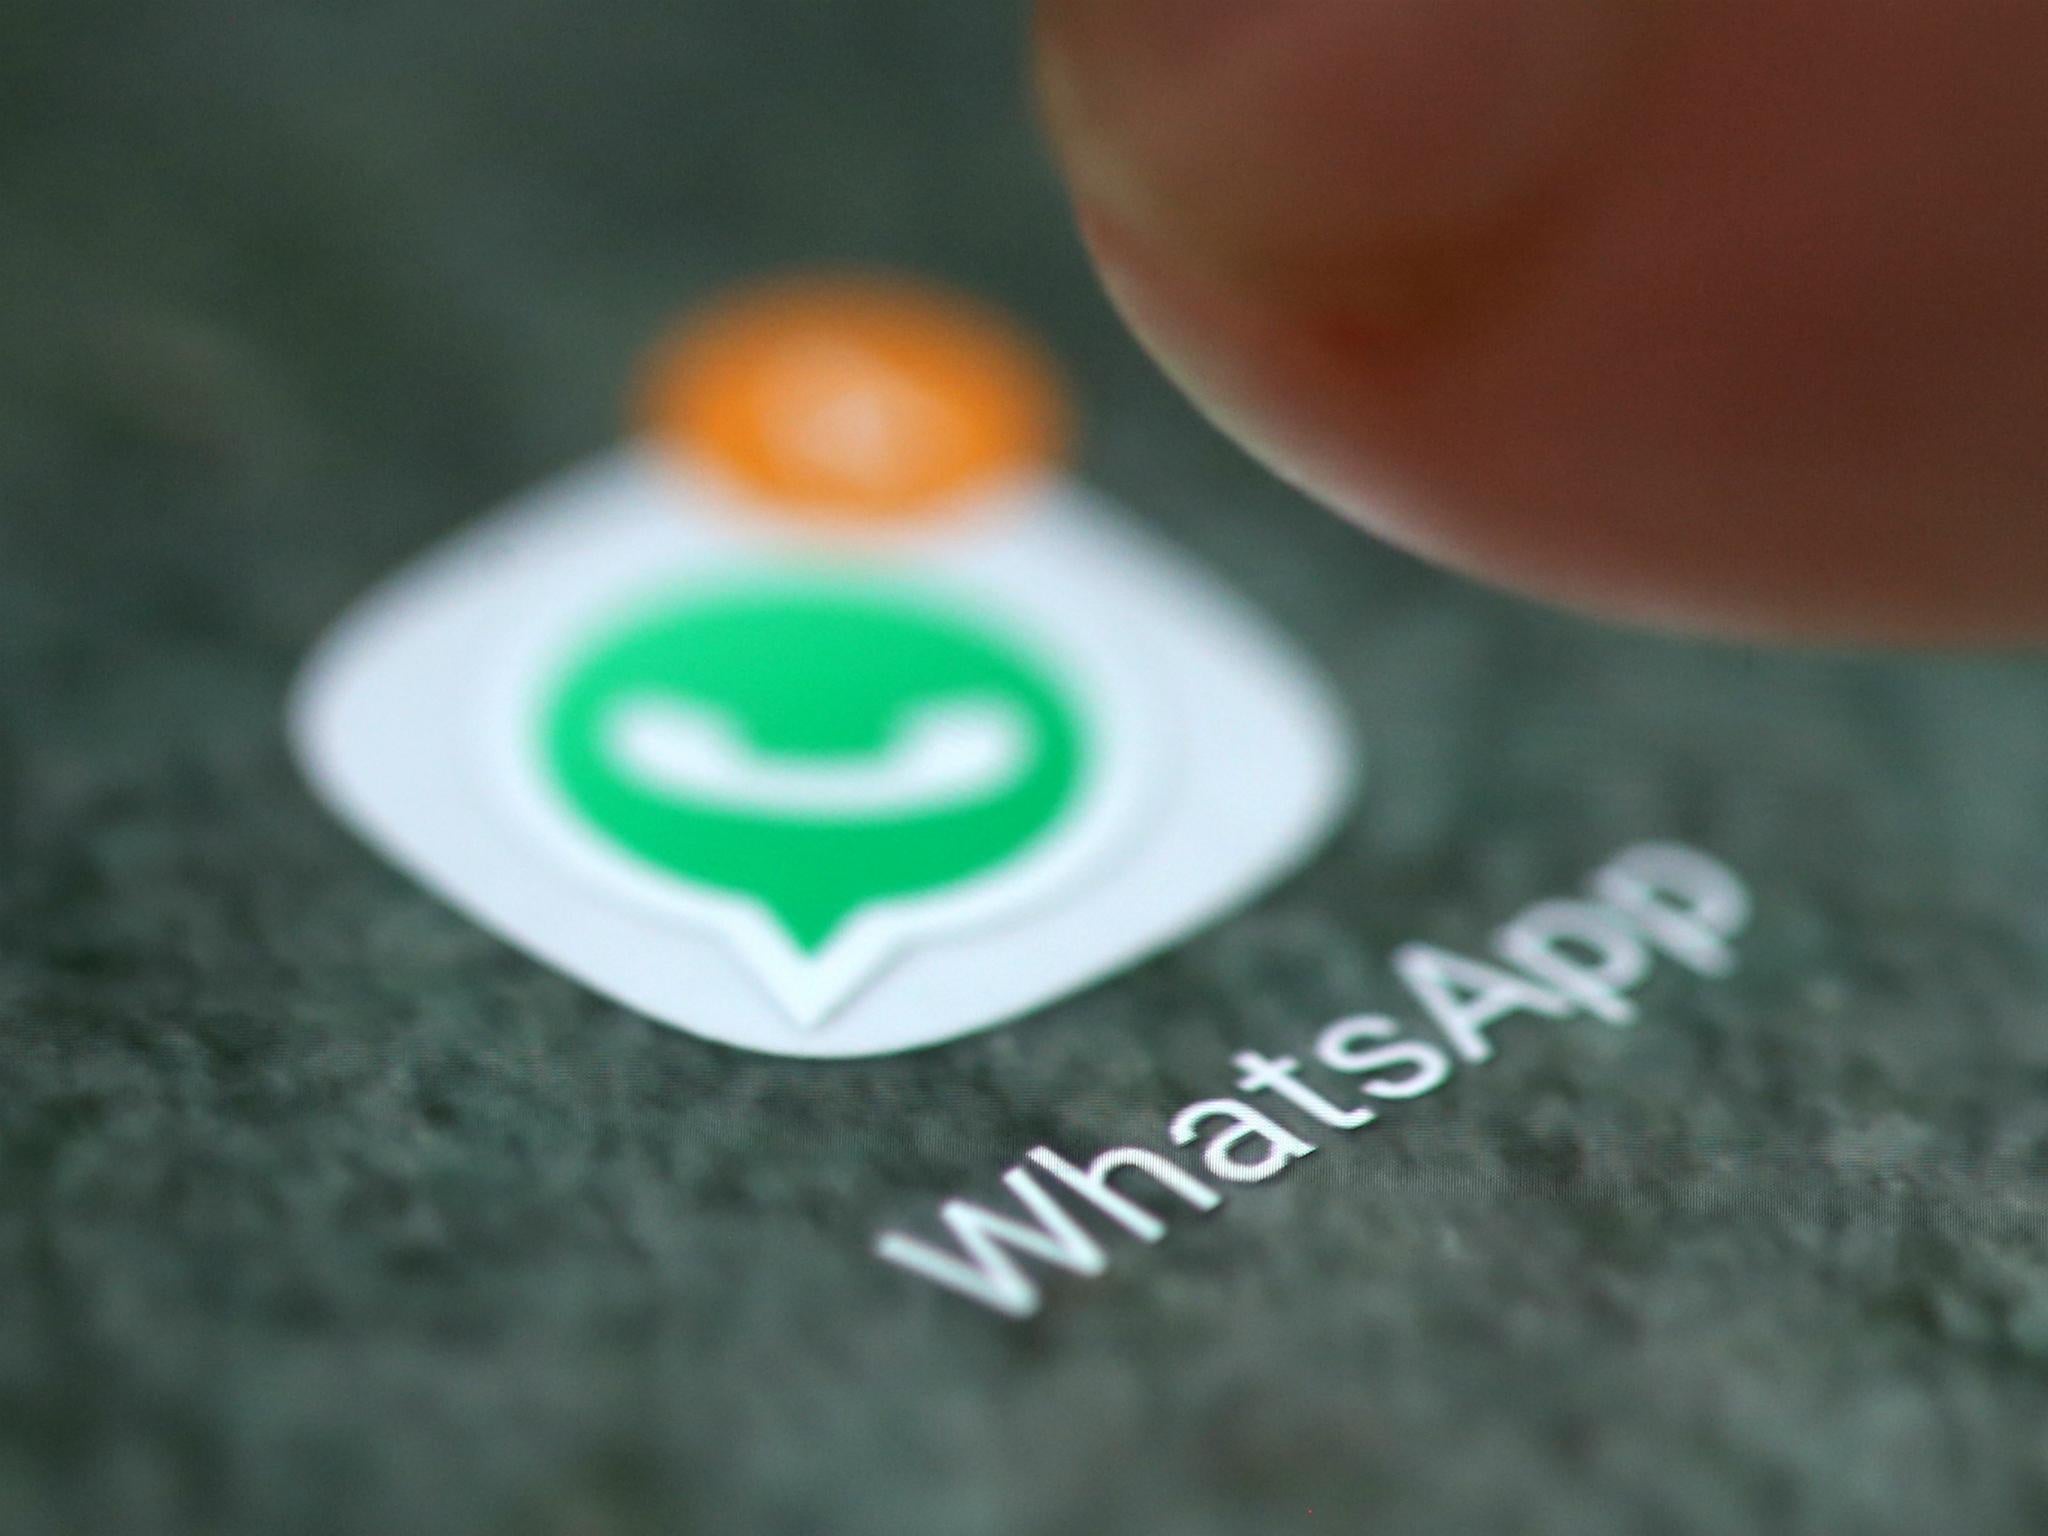 WhatsApp update to include small 'forwarded' message in effort to fight hoaxes